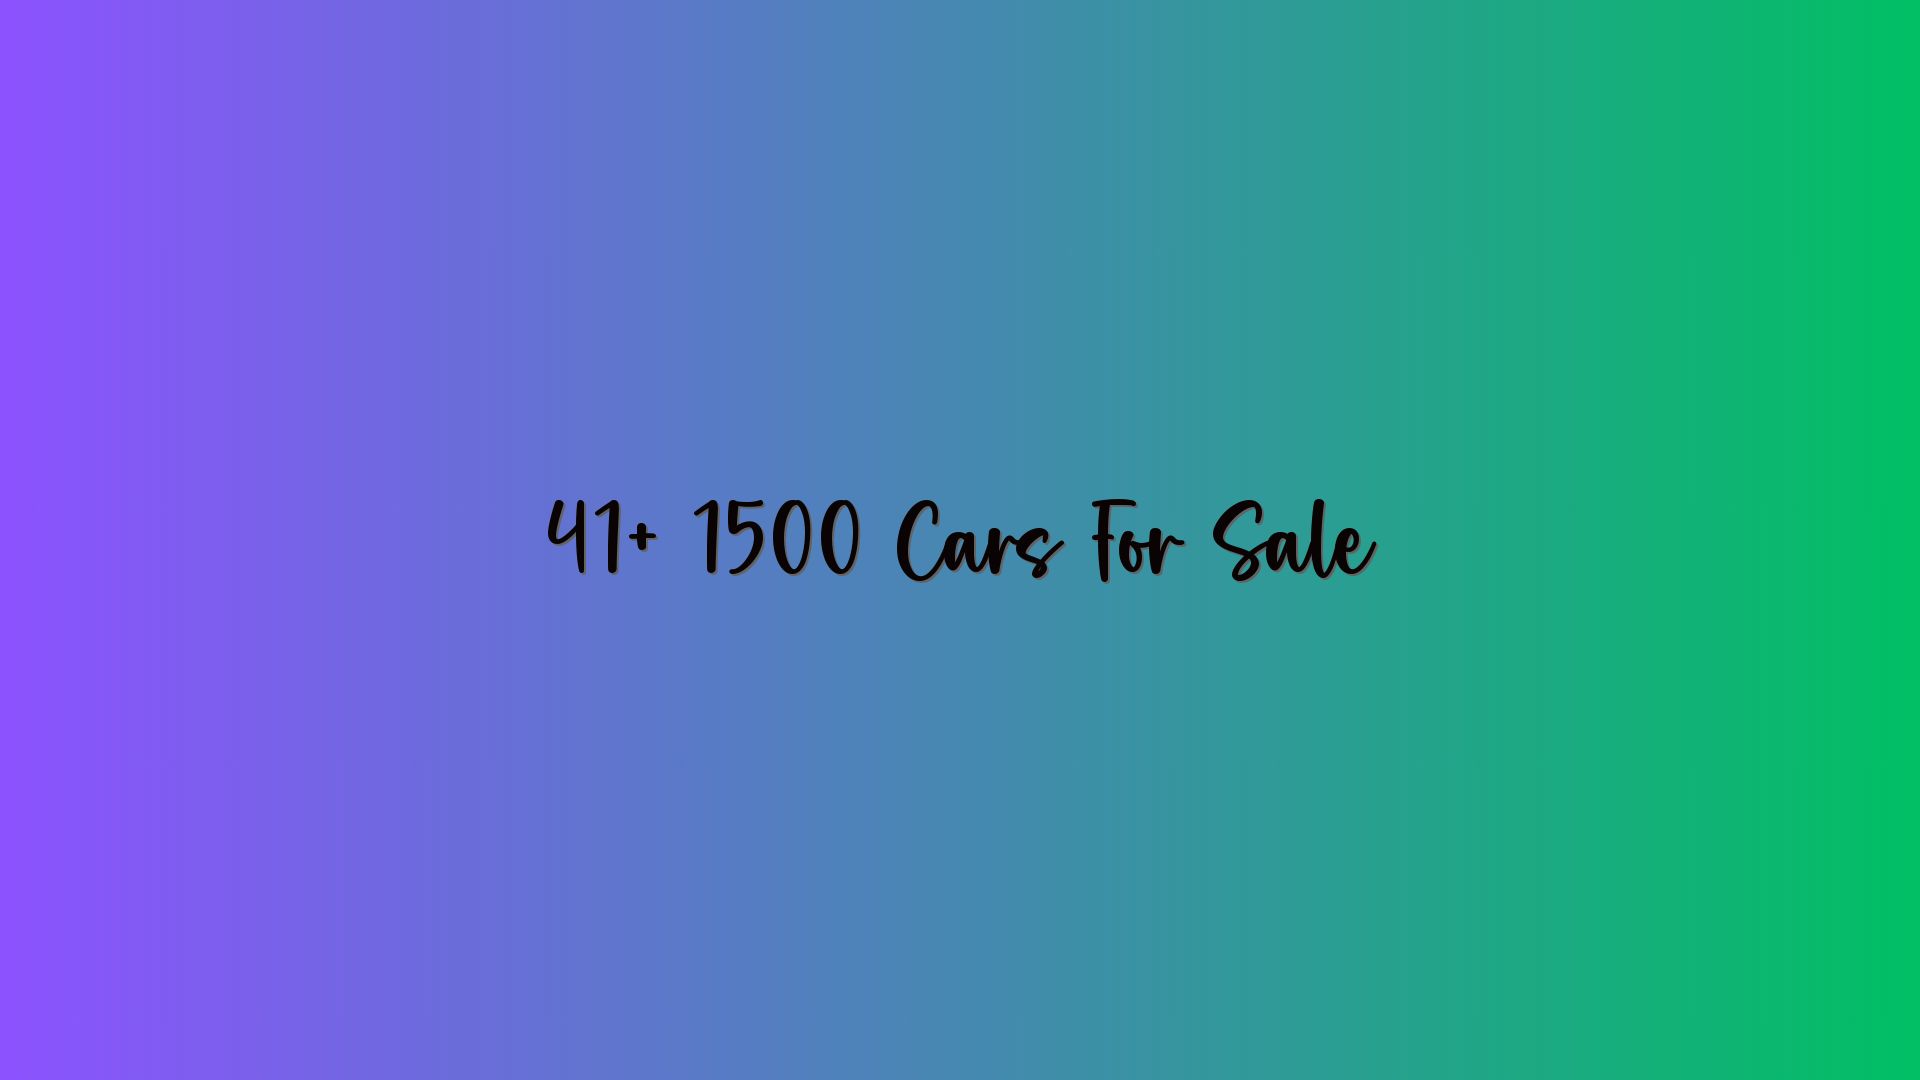 41+ 1500 Cars For Sale